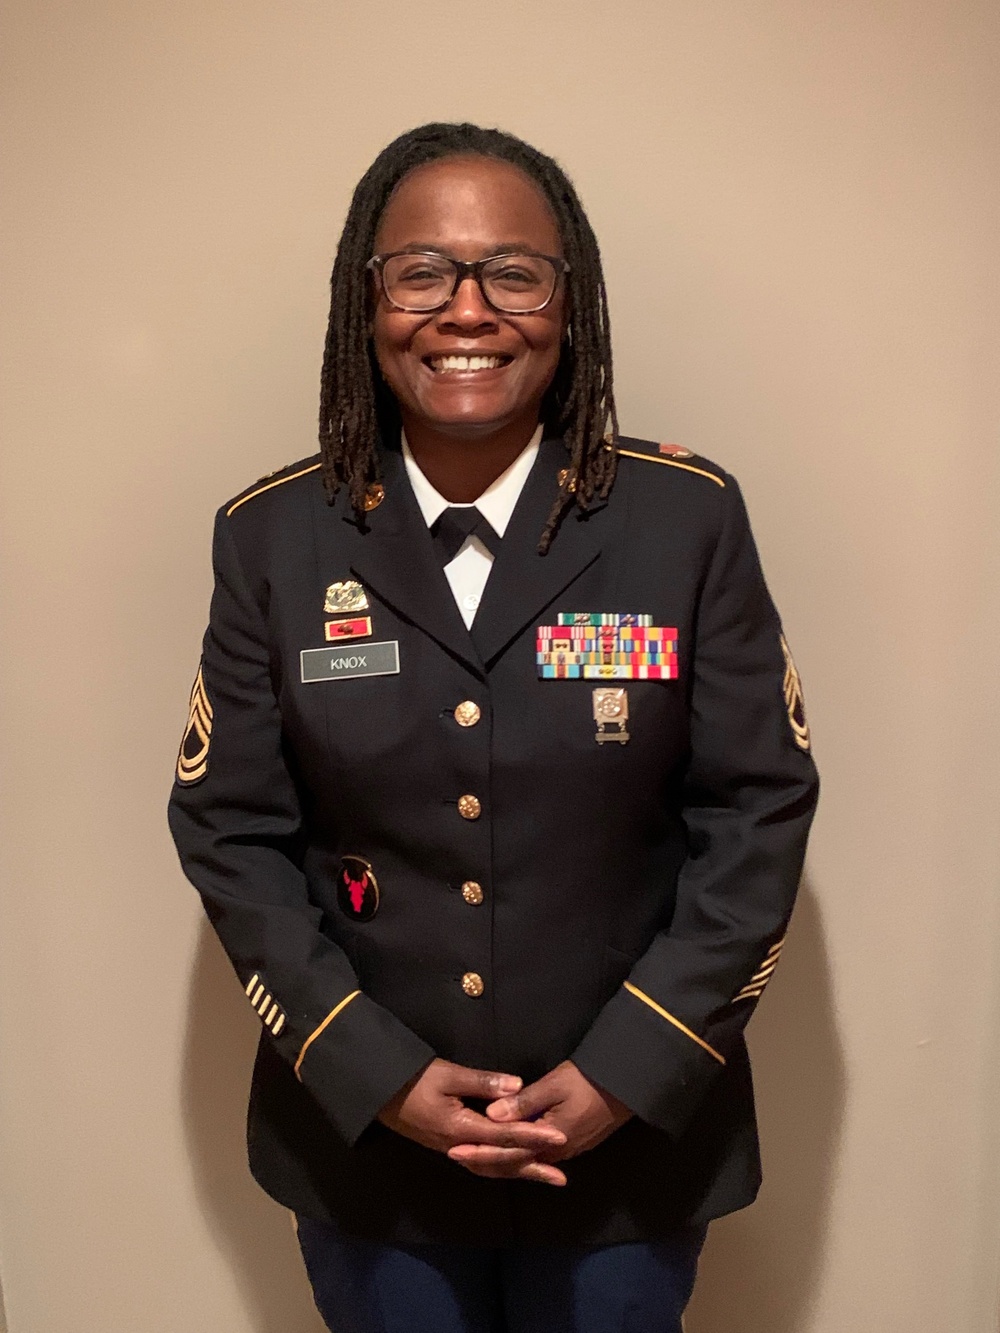 Women in Leadership: Sgt. 1st Class Lina Knox